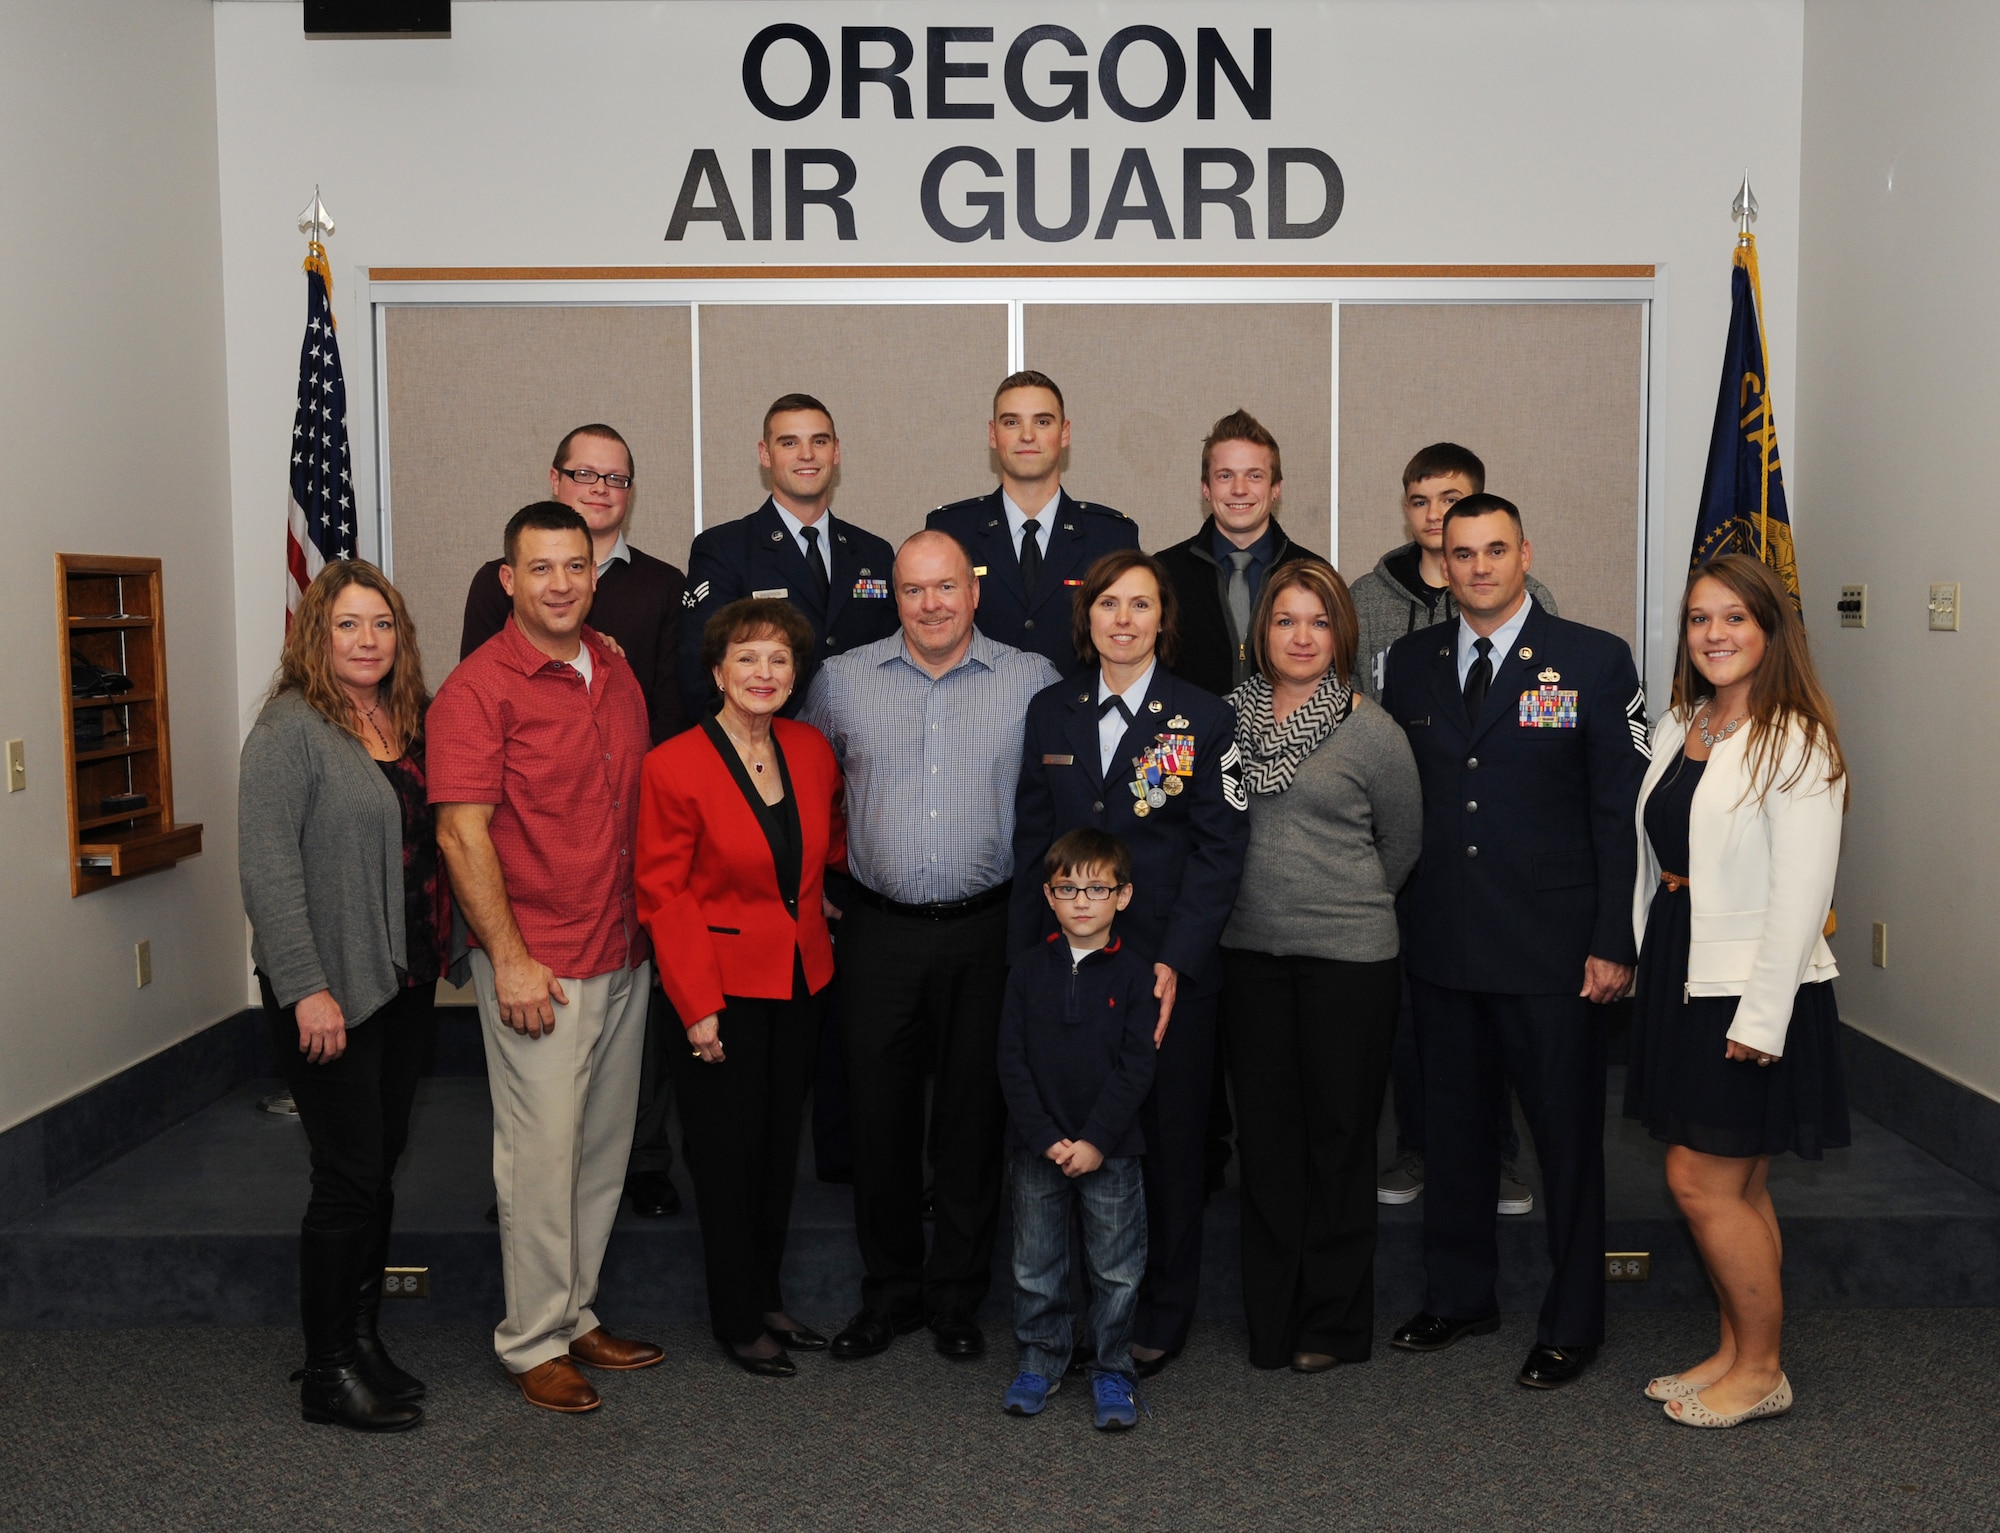 Family members of Chief Master Sgt. Jean Allen gather for a photograph following her formal retirement ceremony, Dec. 22, 2015, Portland Air National Guard Base, Ore. (Air National Guard photo by Tech. Sgt. John Hughel, 142nd Fighter Wing Public Affairs)